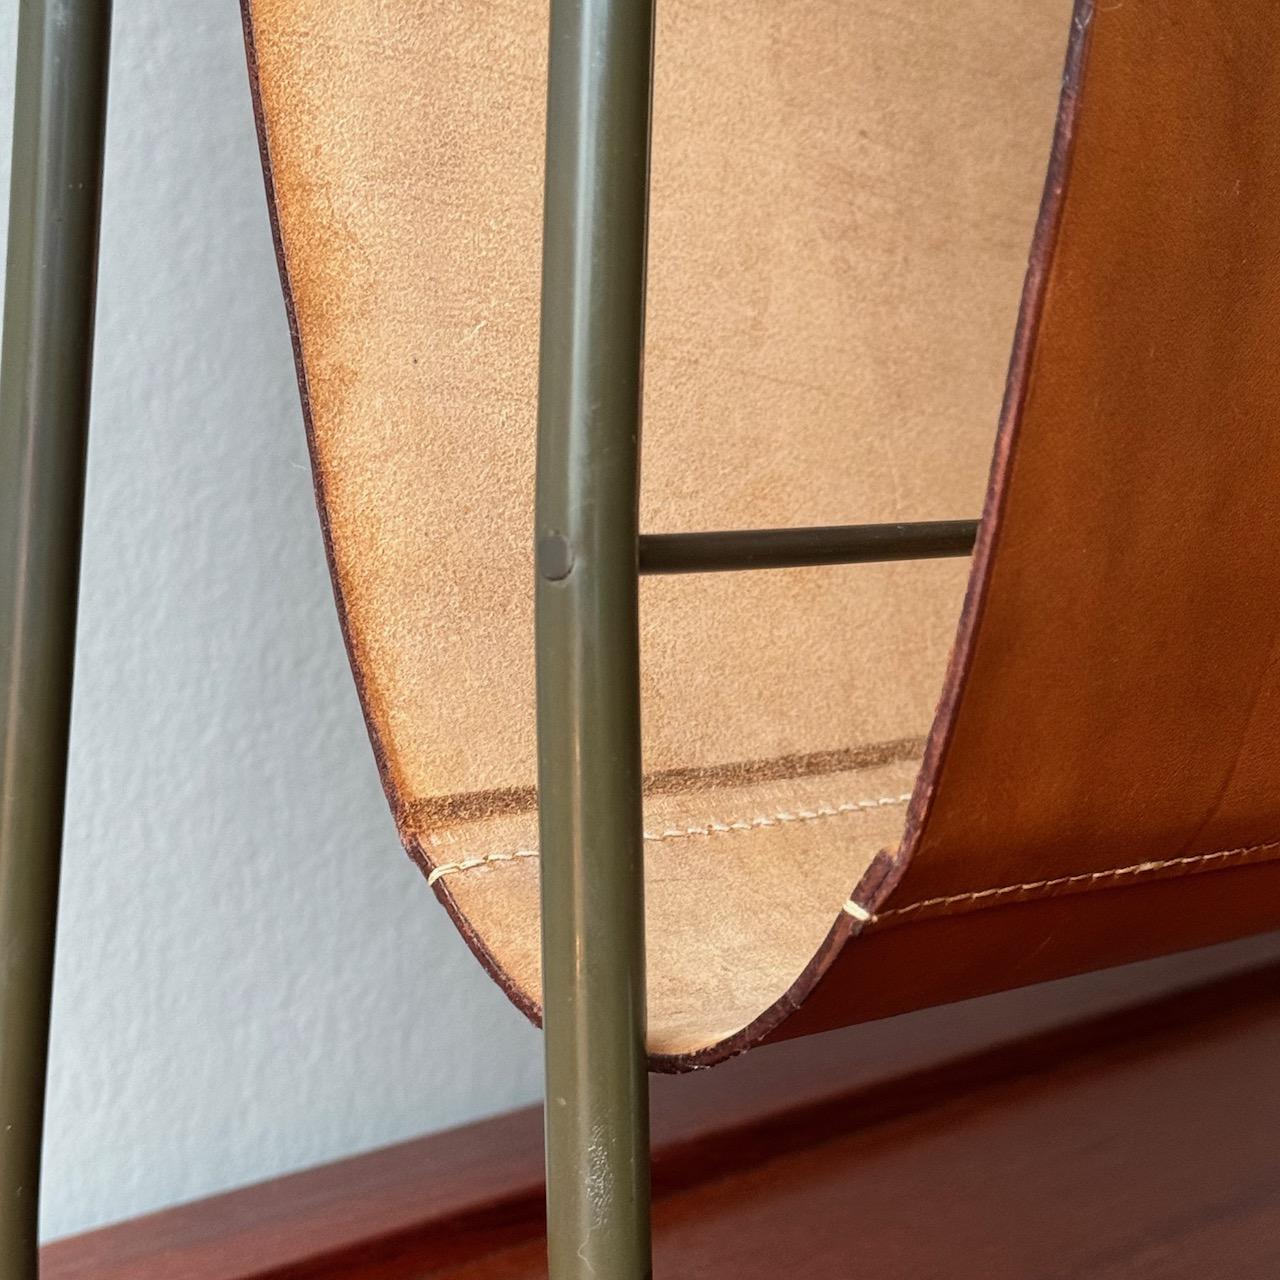 A leather magazine rack designed by Carl Auböck II during the 1950s.

Comprised of a tan leather sling and tubular brass armature, this magazine rack was designed and made by Carl Auböck II. The patinated brass frame of the rack provides a pleasing